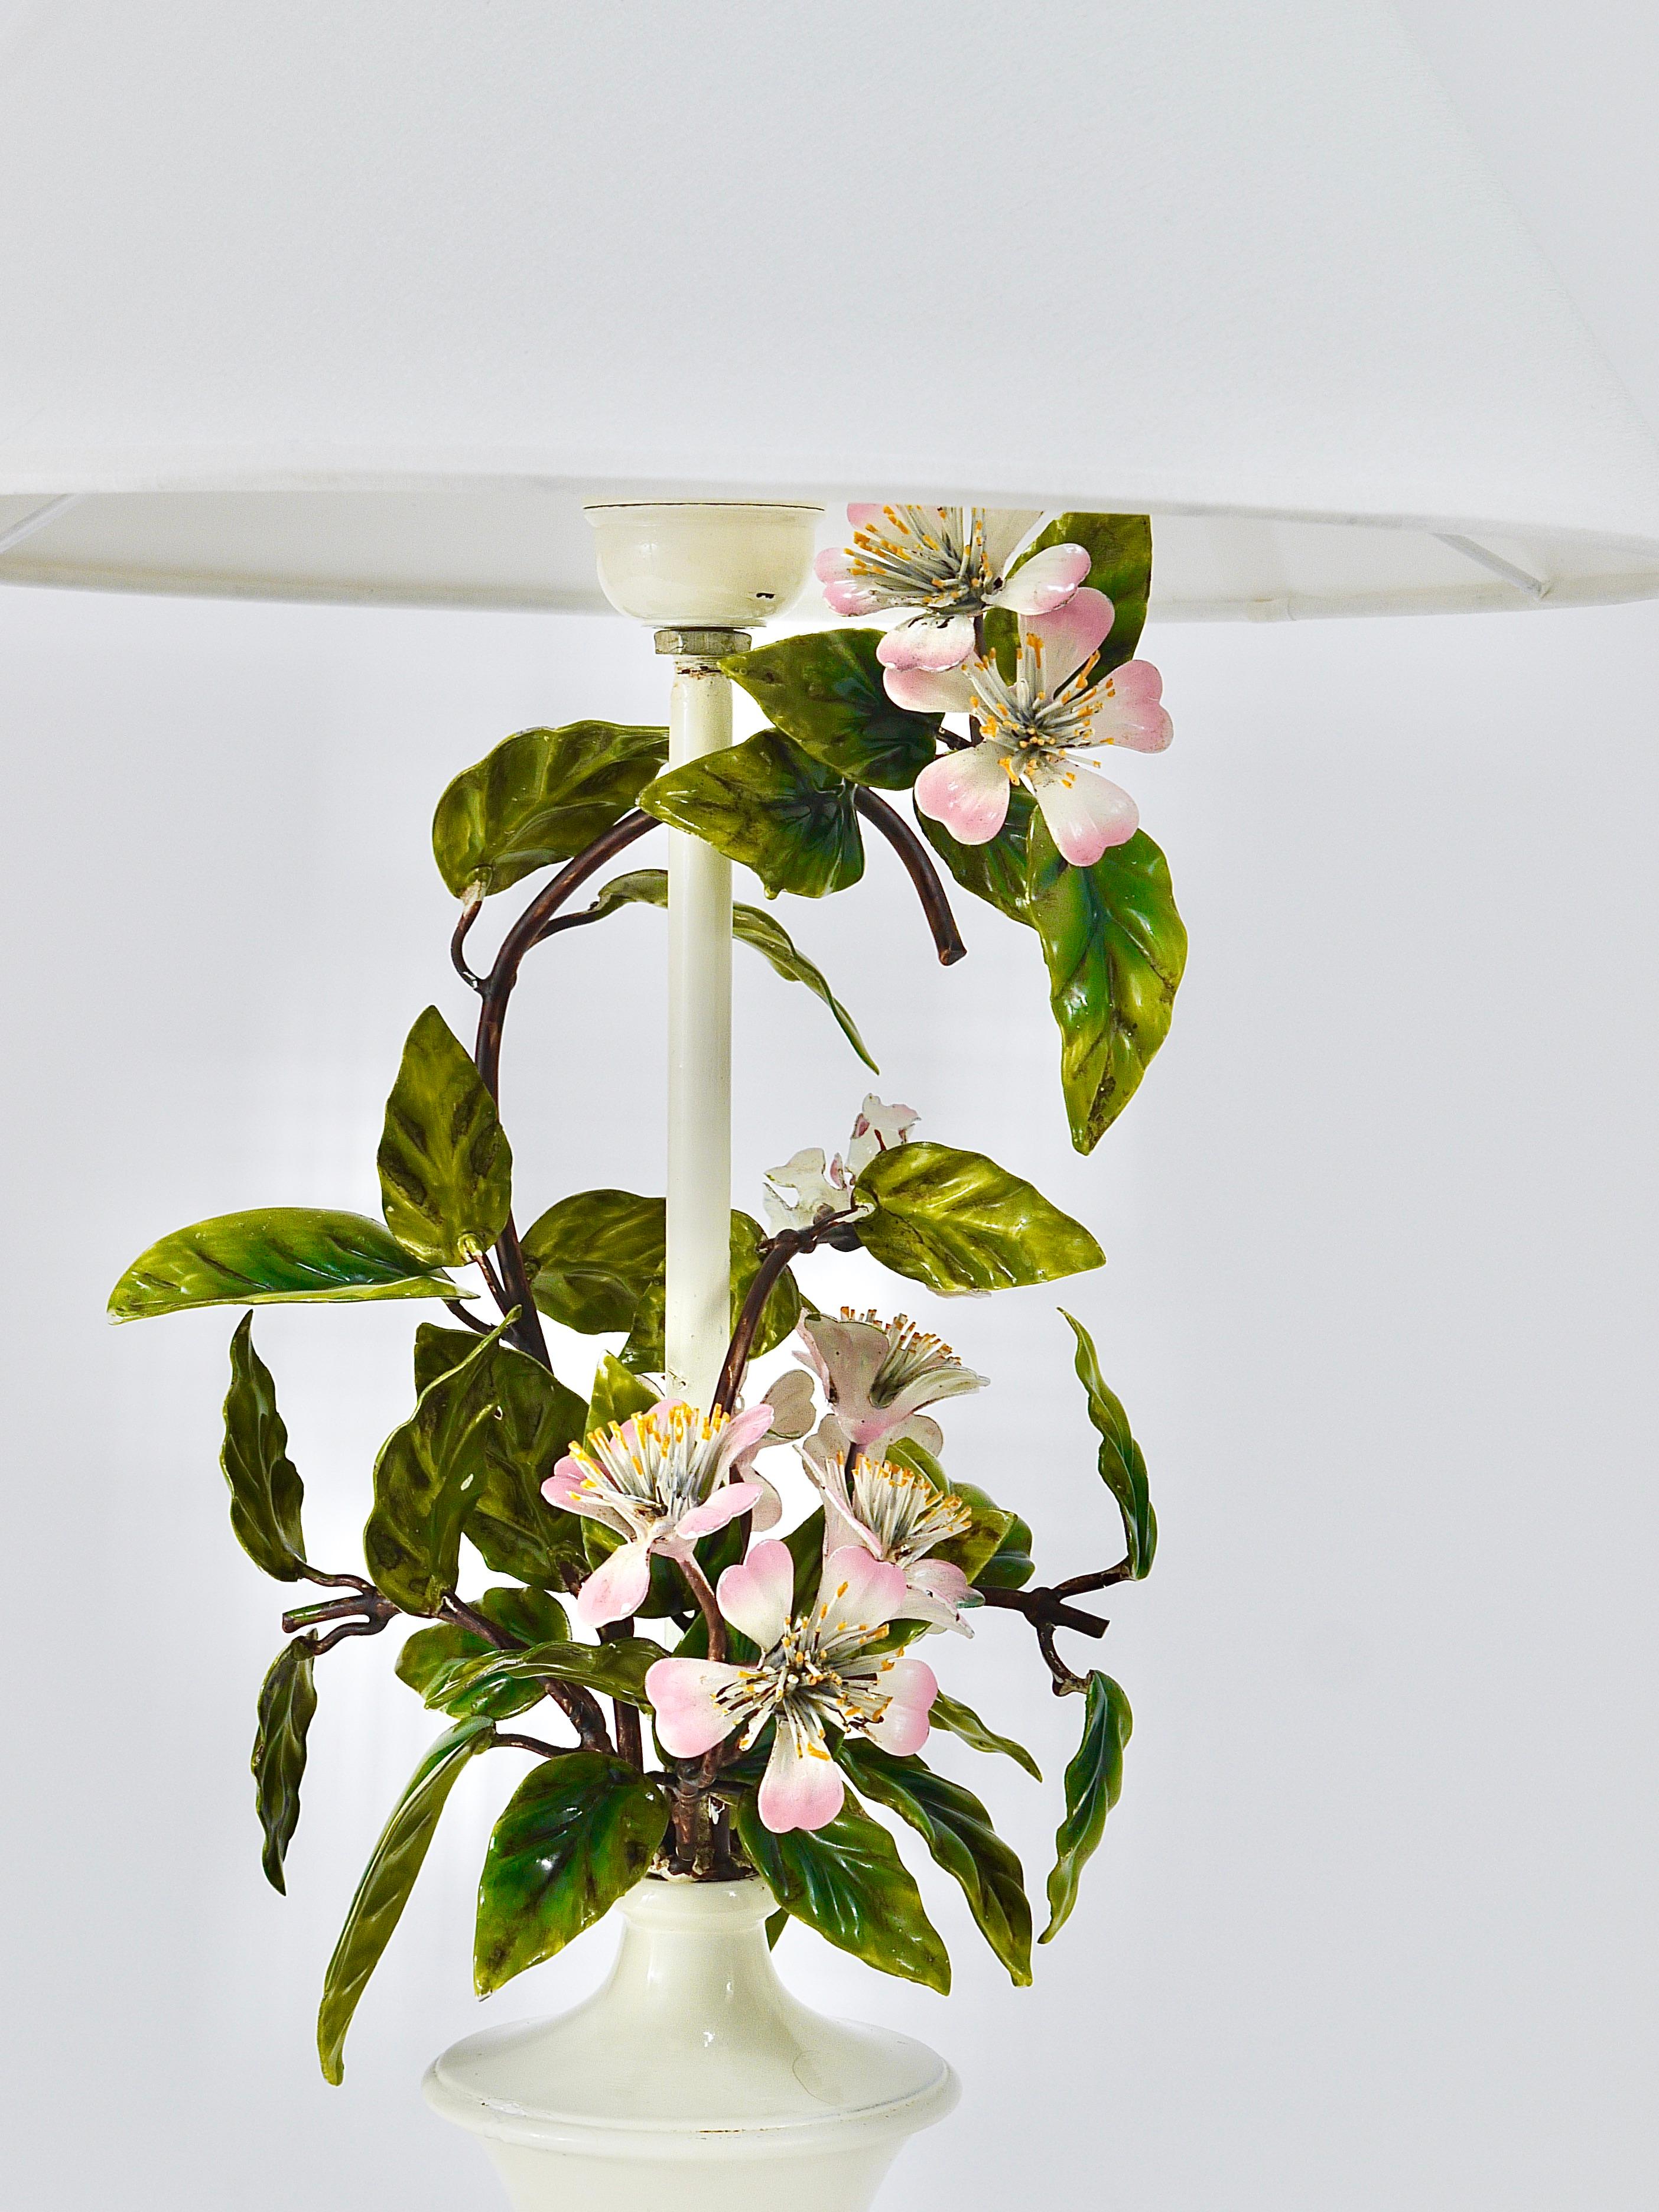 Salvadori Hand Painted Wild Apple Blossom Toleware Table Lamp, Italy, 1950s For Sale 5